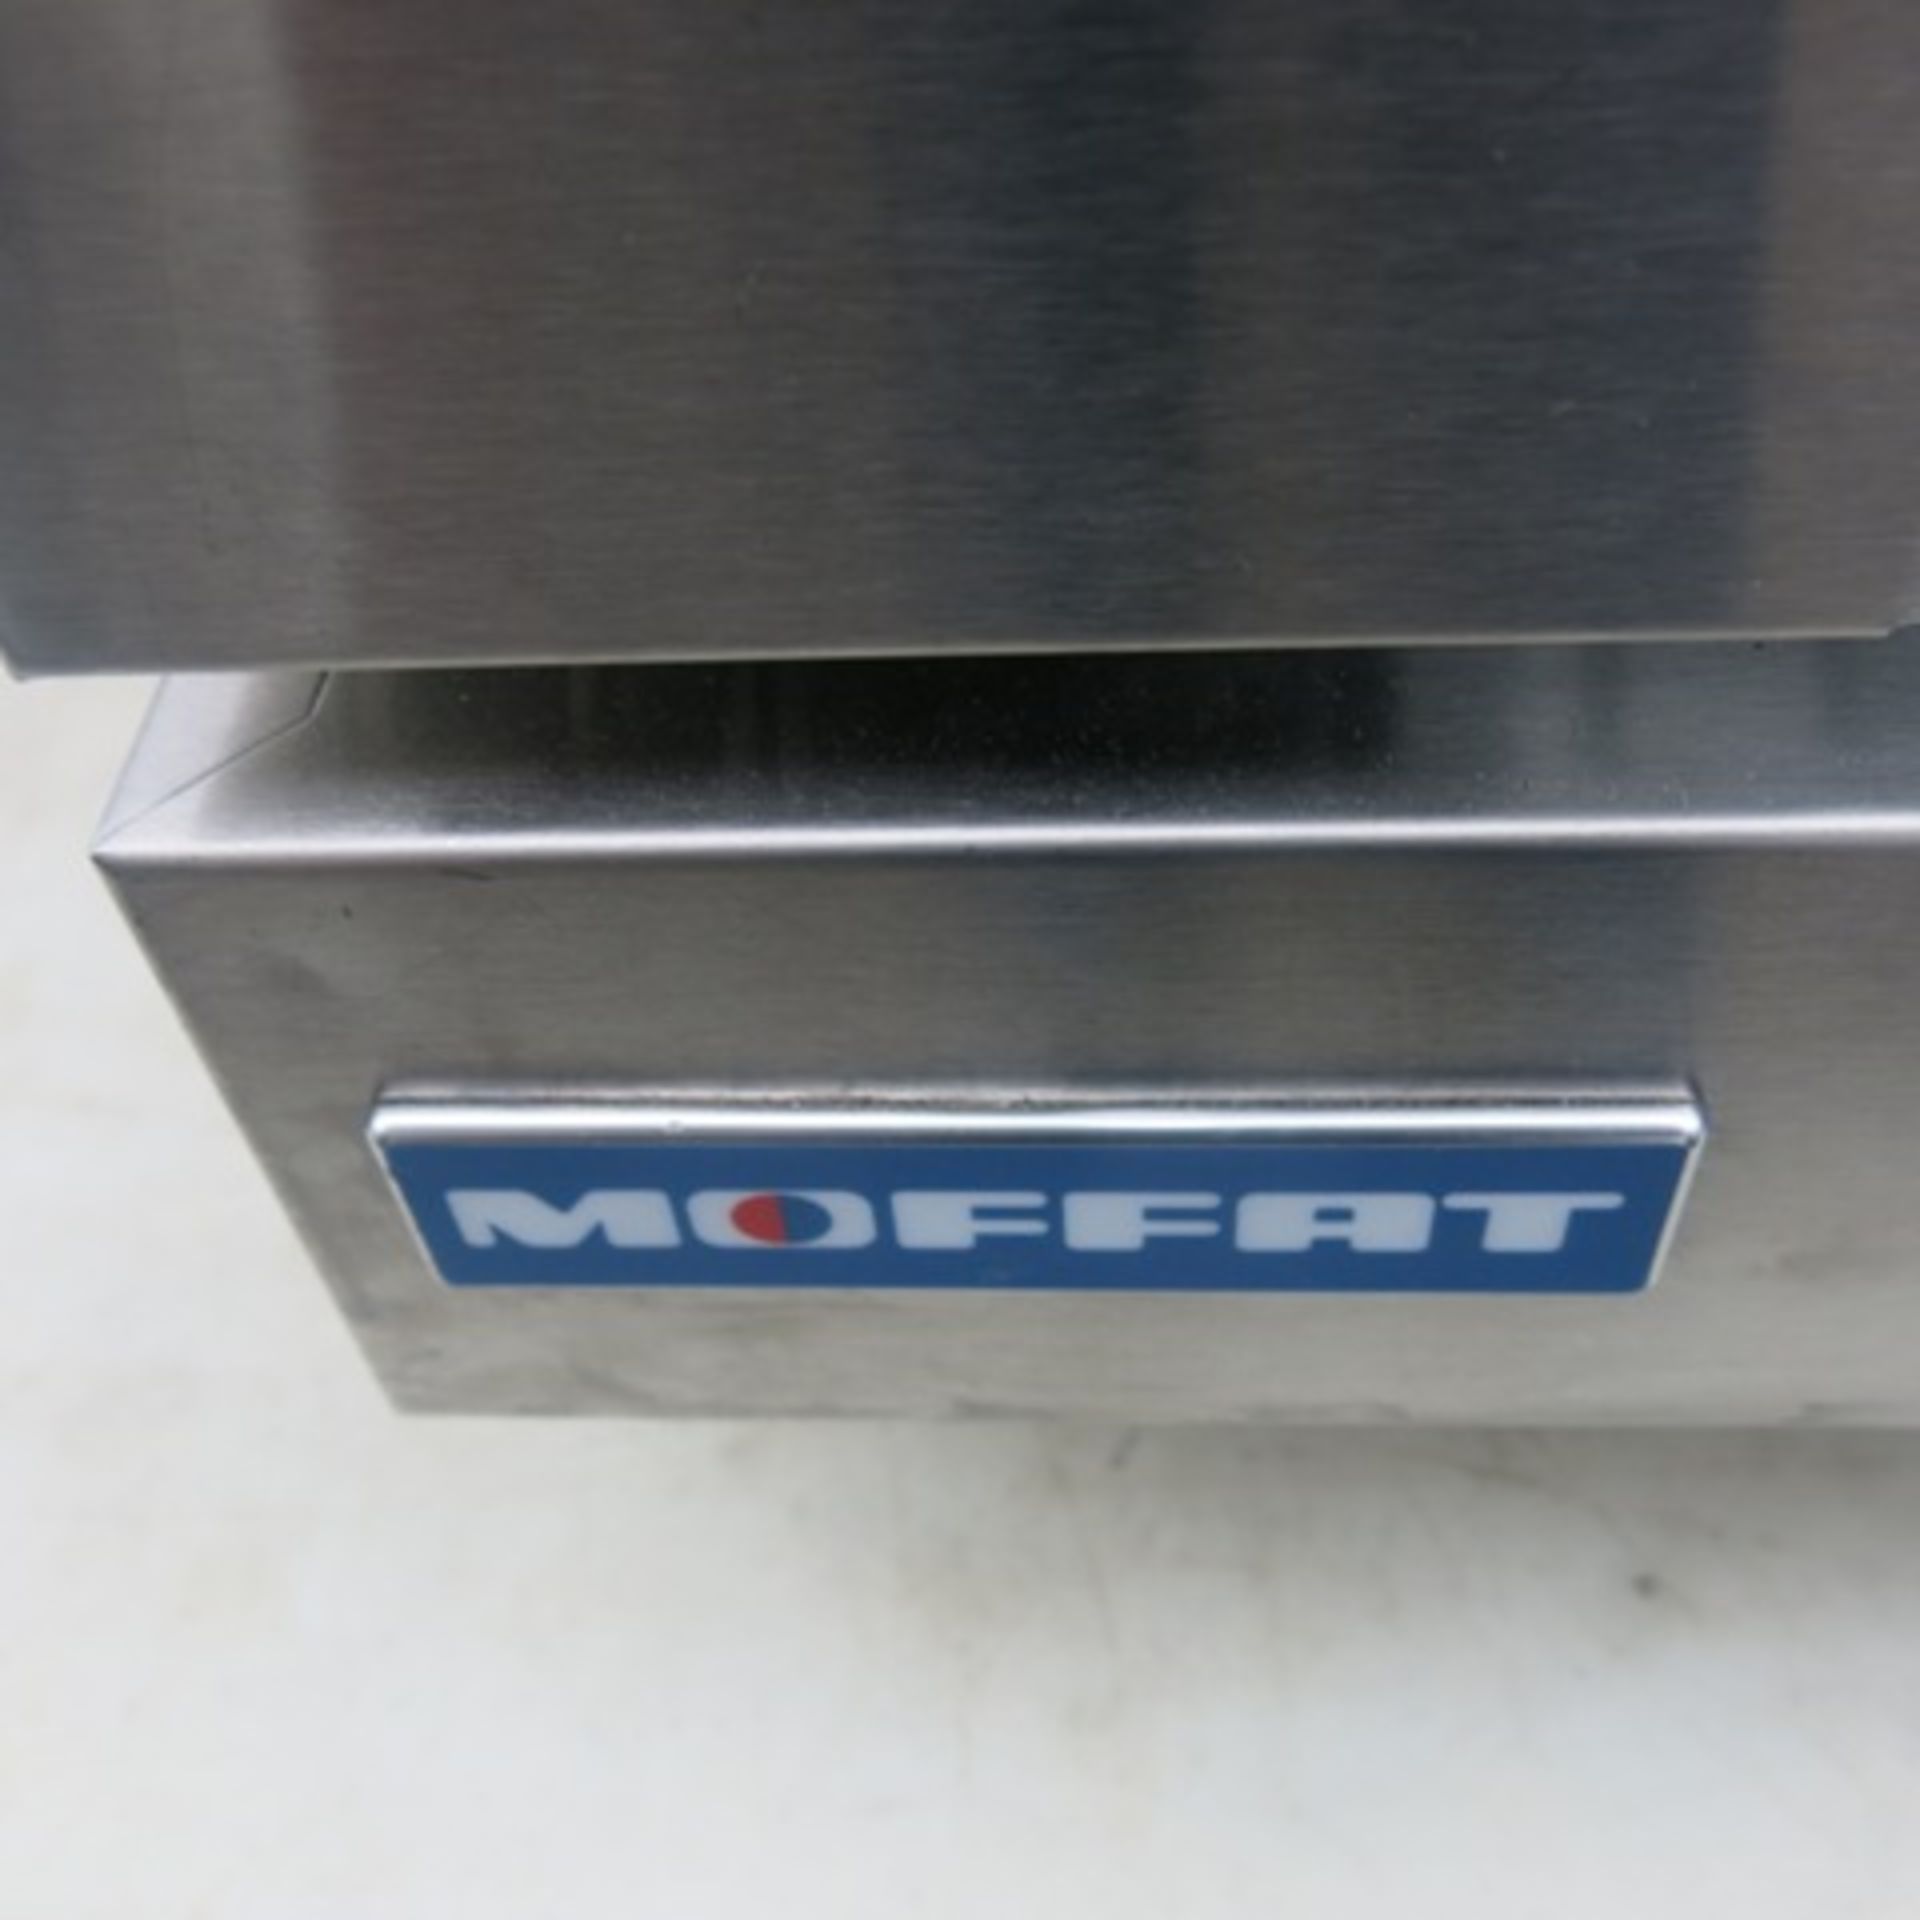 Moffat Counter Top Turbo Fan Convection Oven, Model E22M3. Comes with 3 Trays - Image 3 of 7